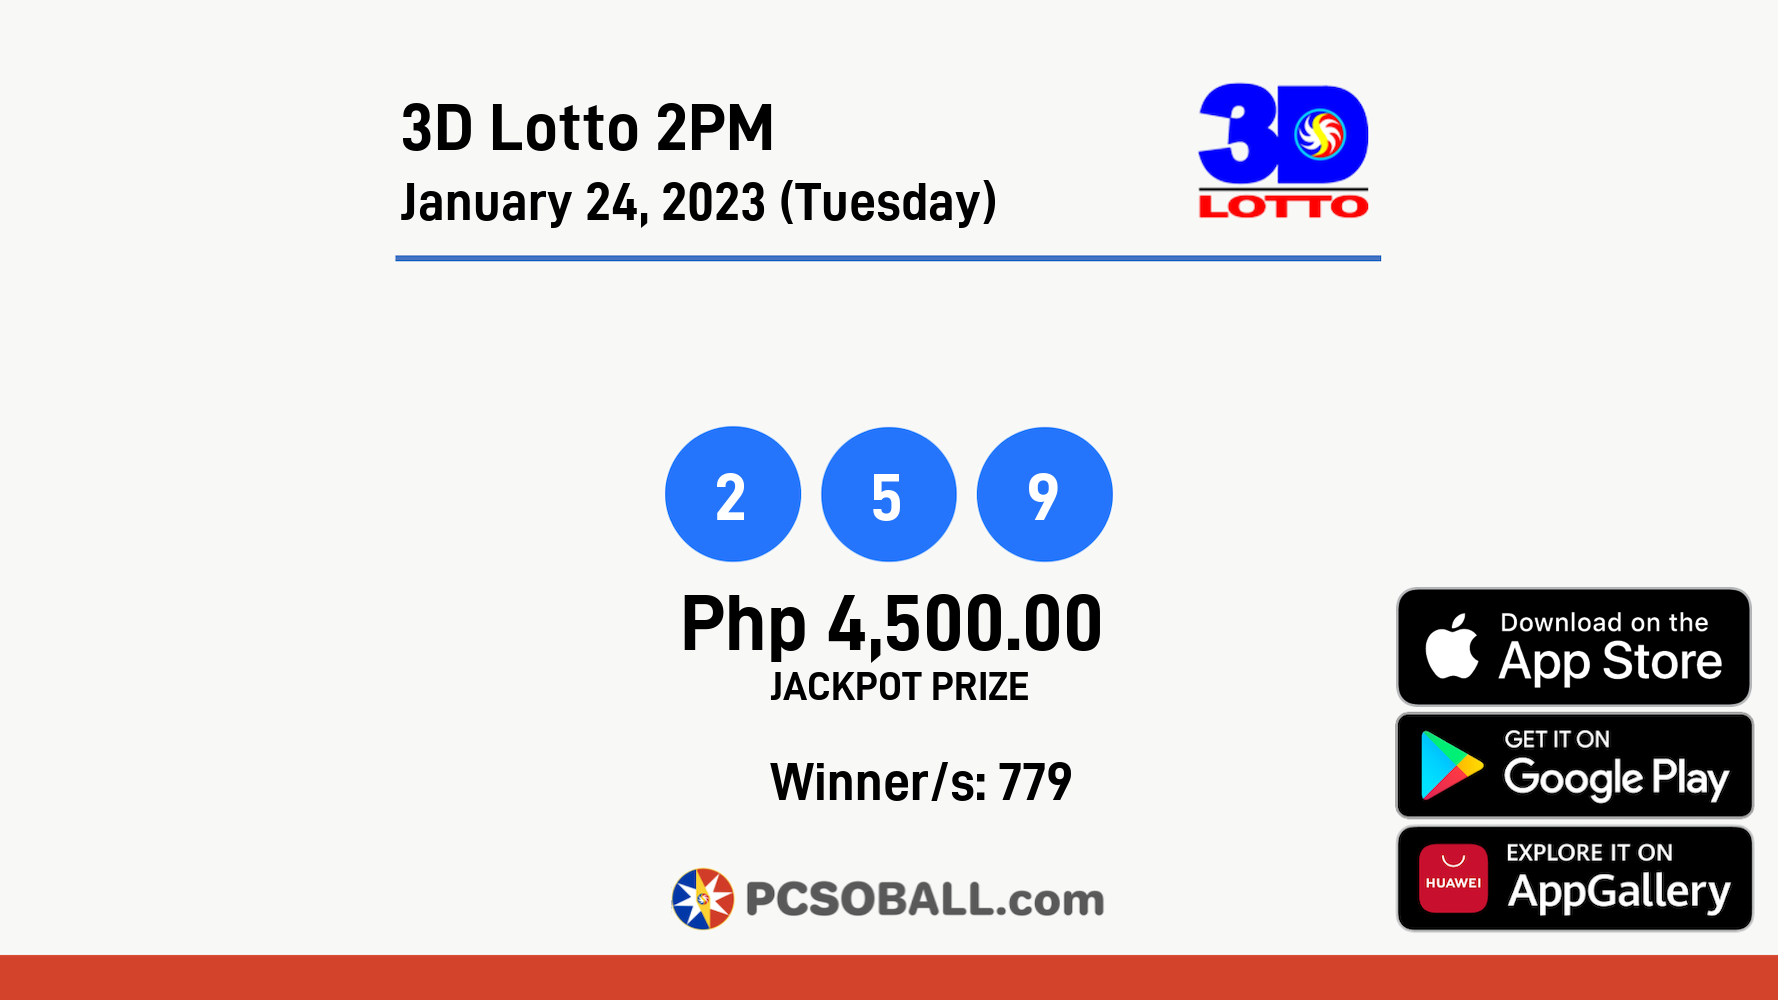 3D Lotto 2PM January 24, 2023 (Tuesday) Result